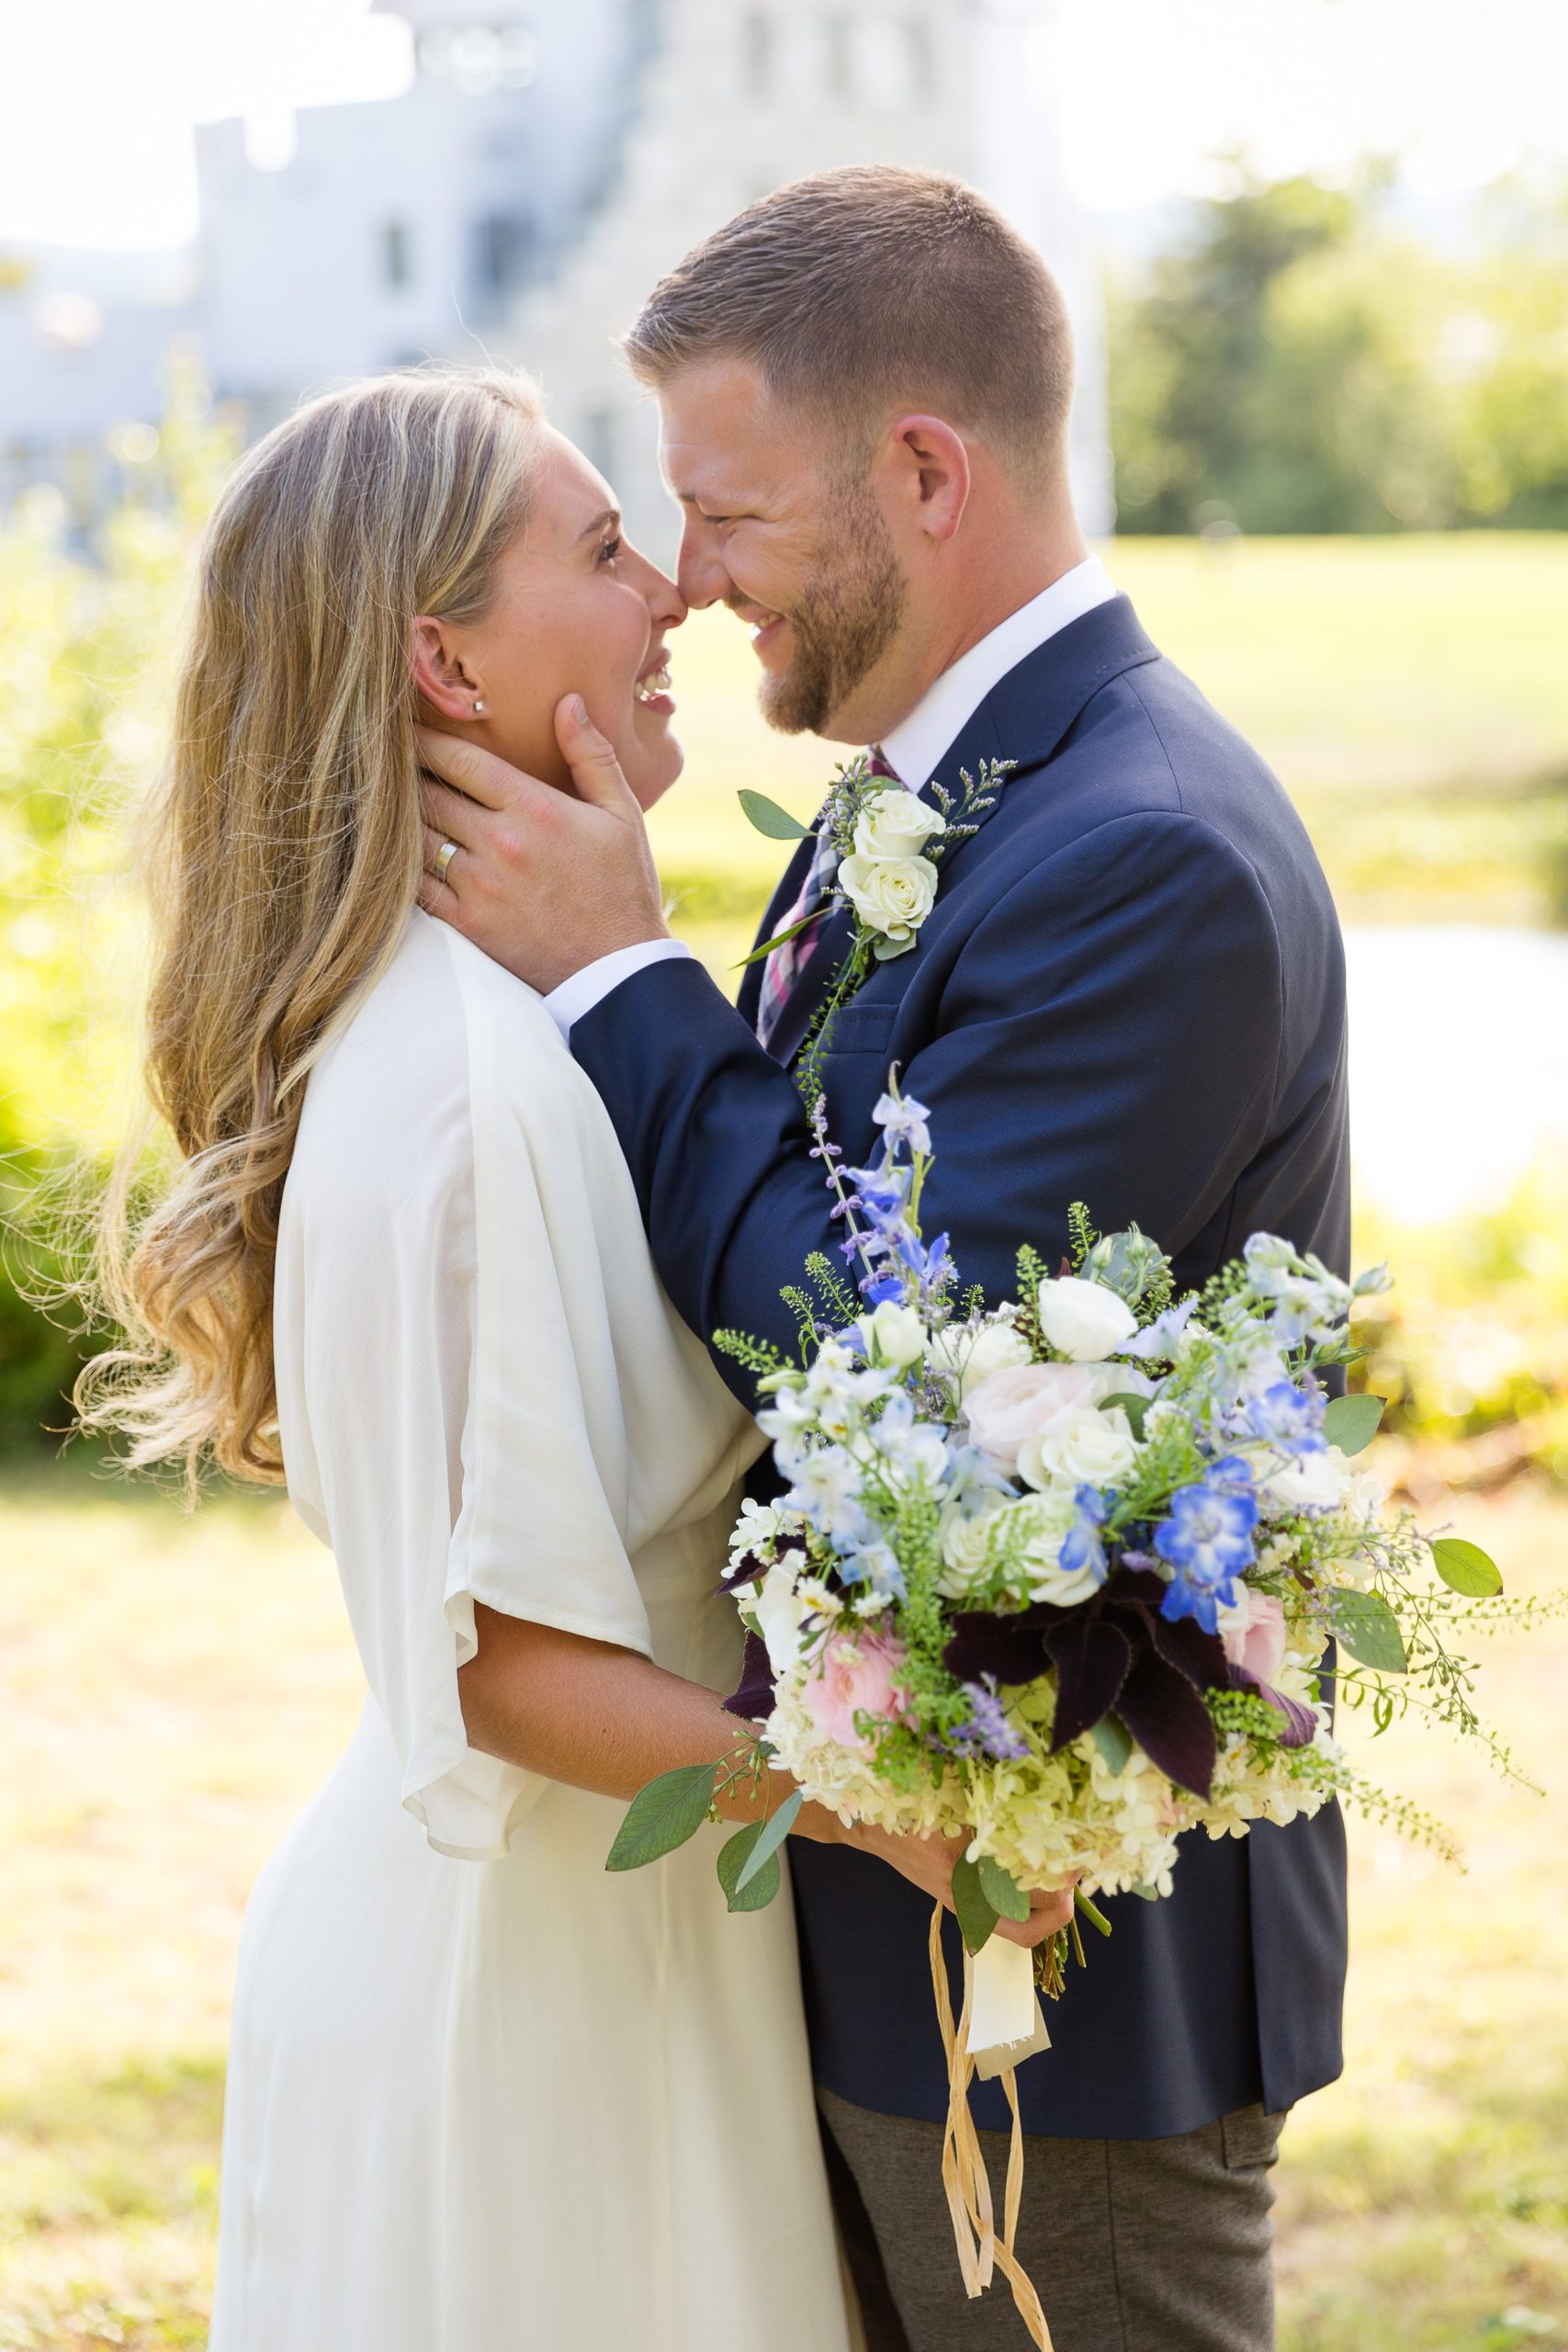 Elopement wedding at a rental home in Vermont